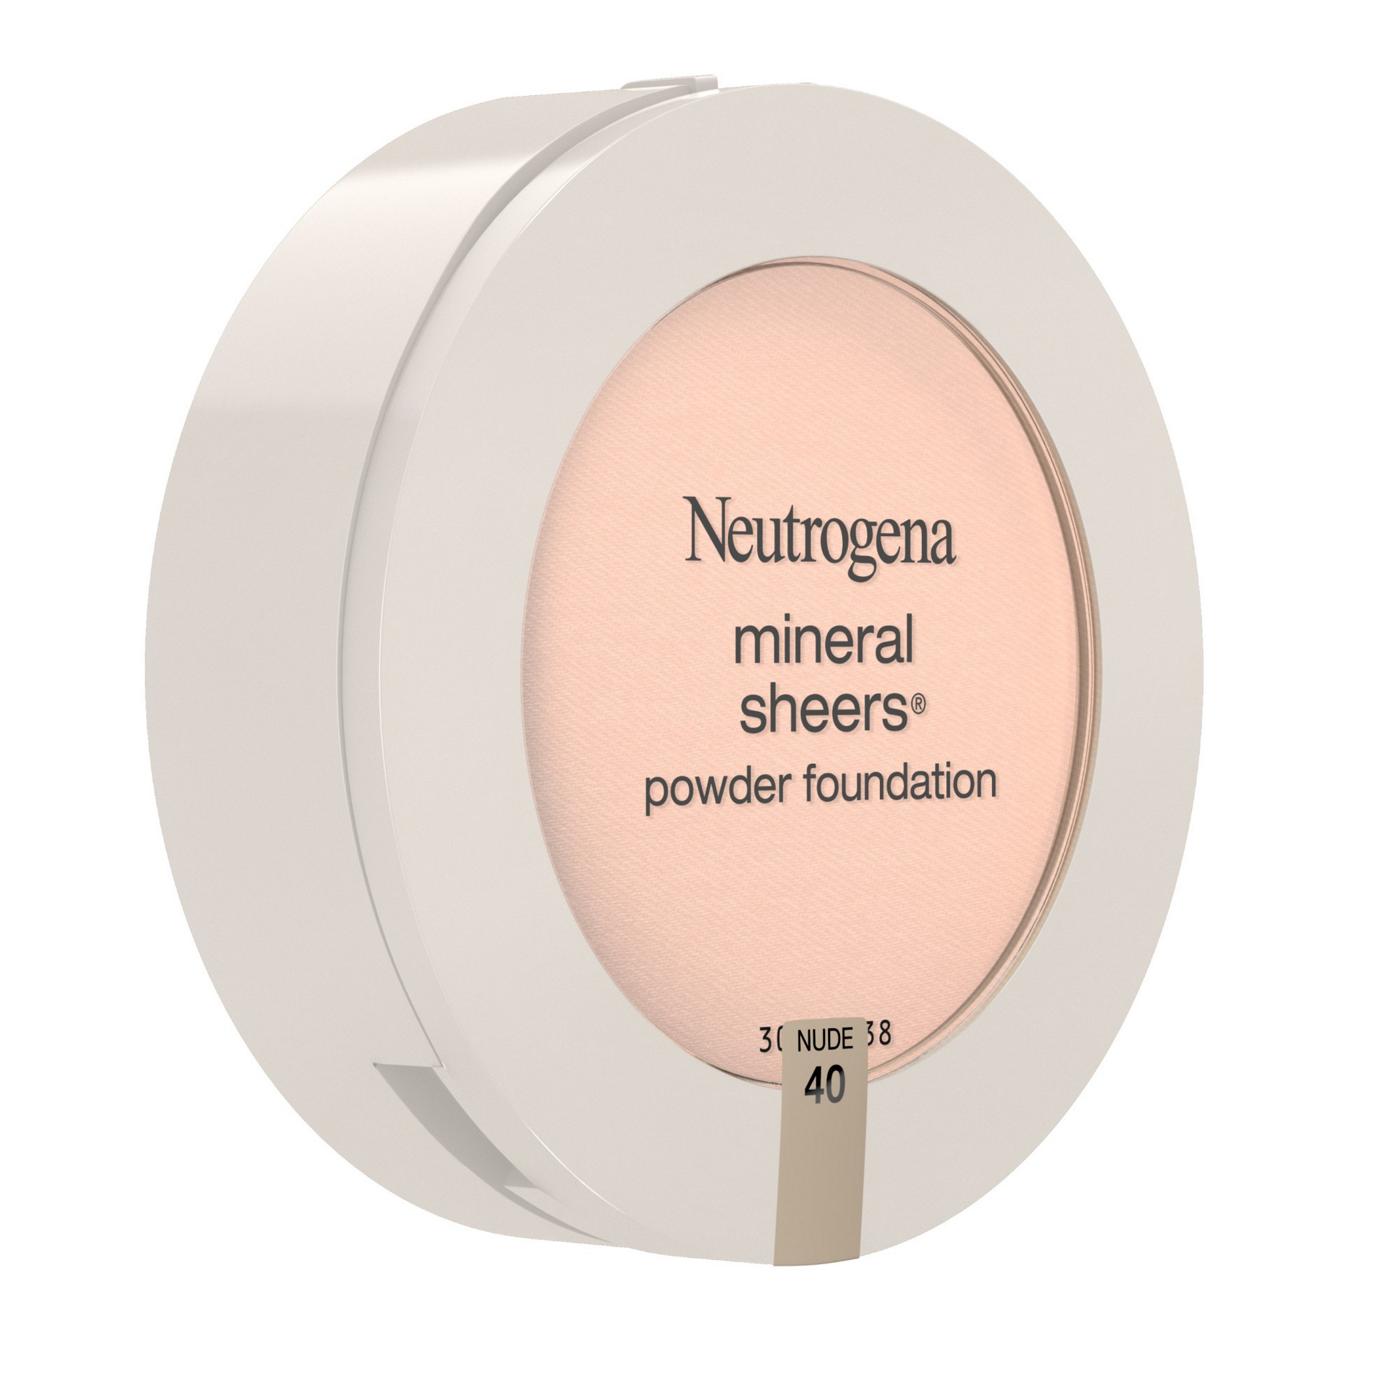 Neutrogena Mineral Sheers 40 Nude Compact Powder Foundation; image 6 of 6